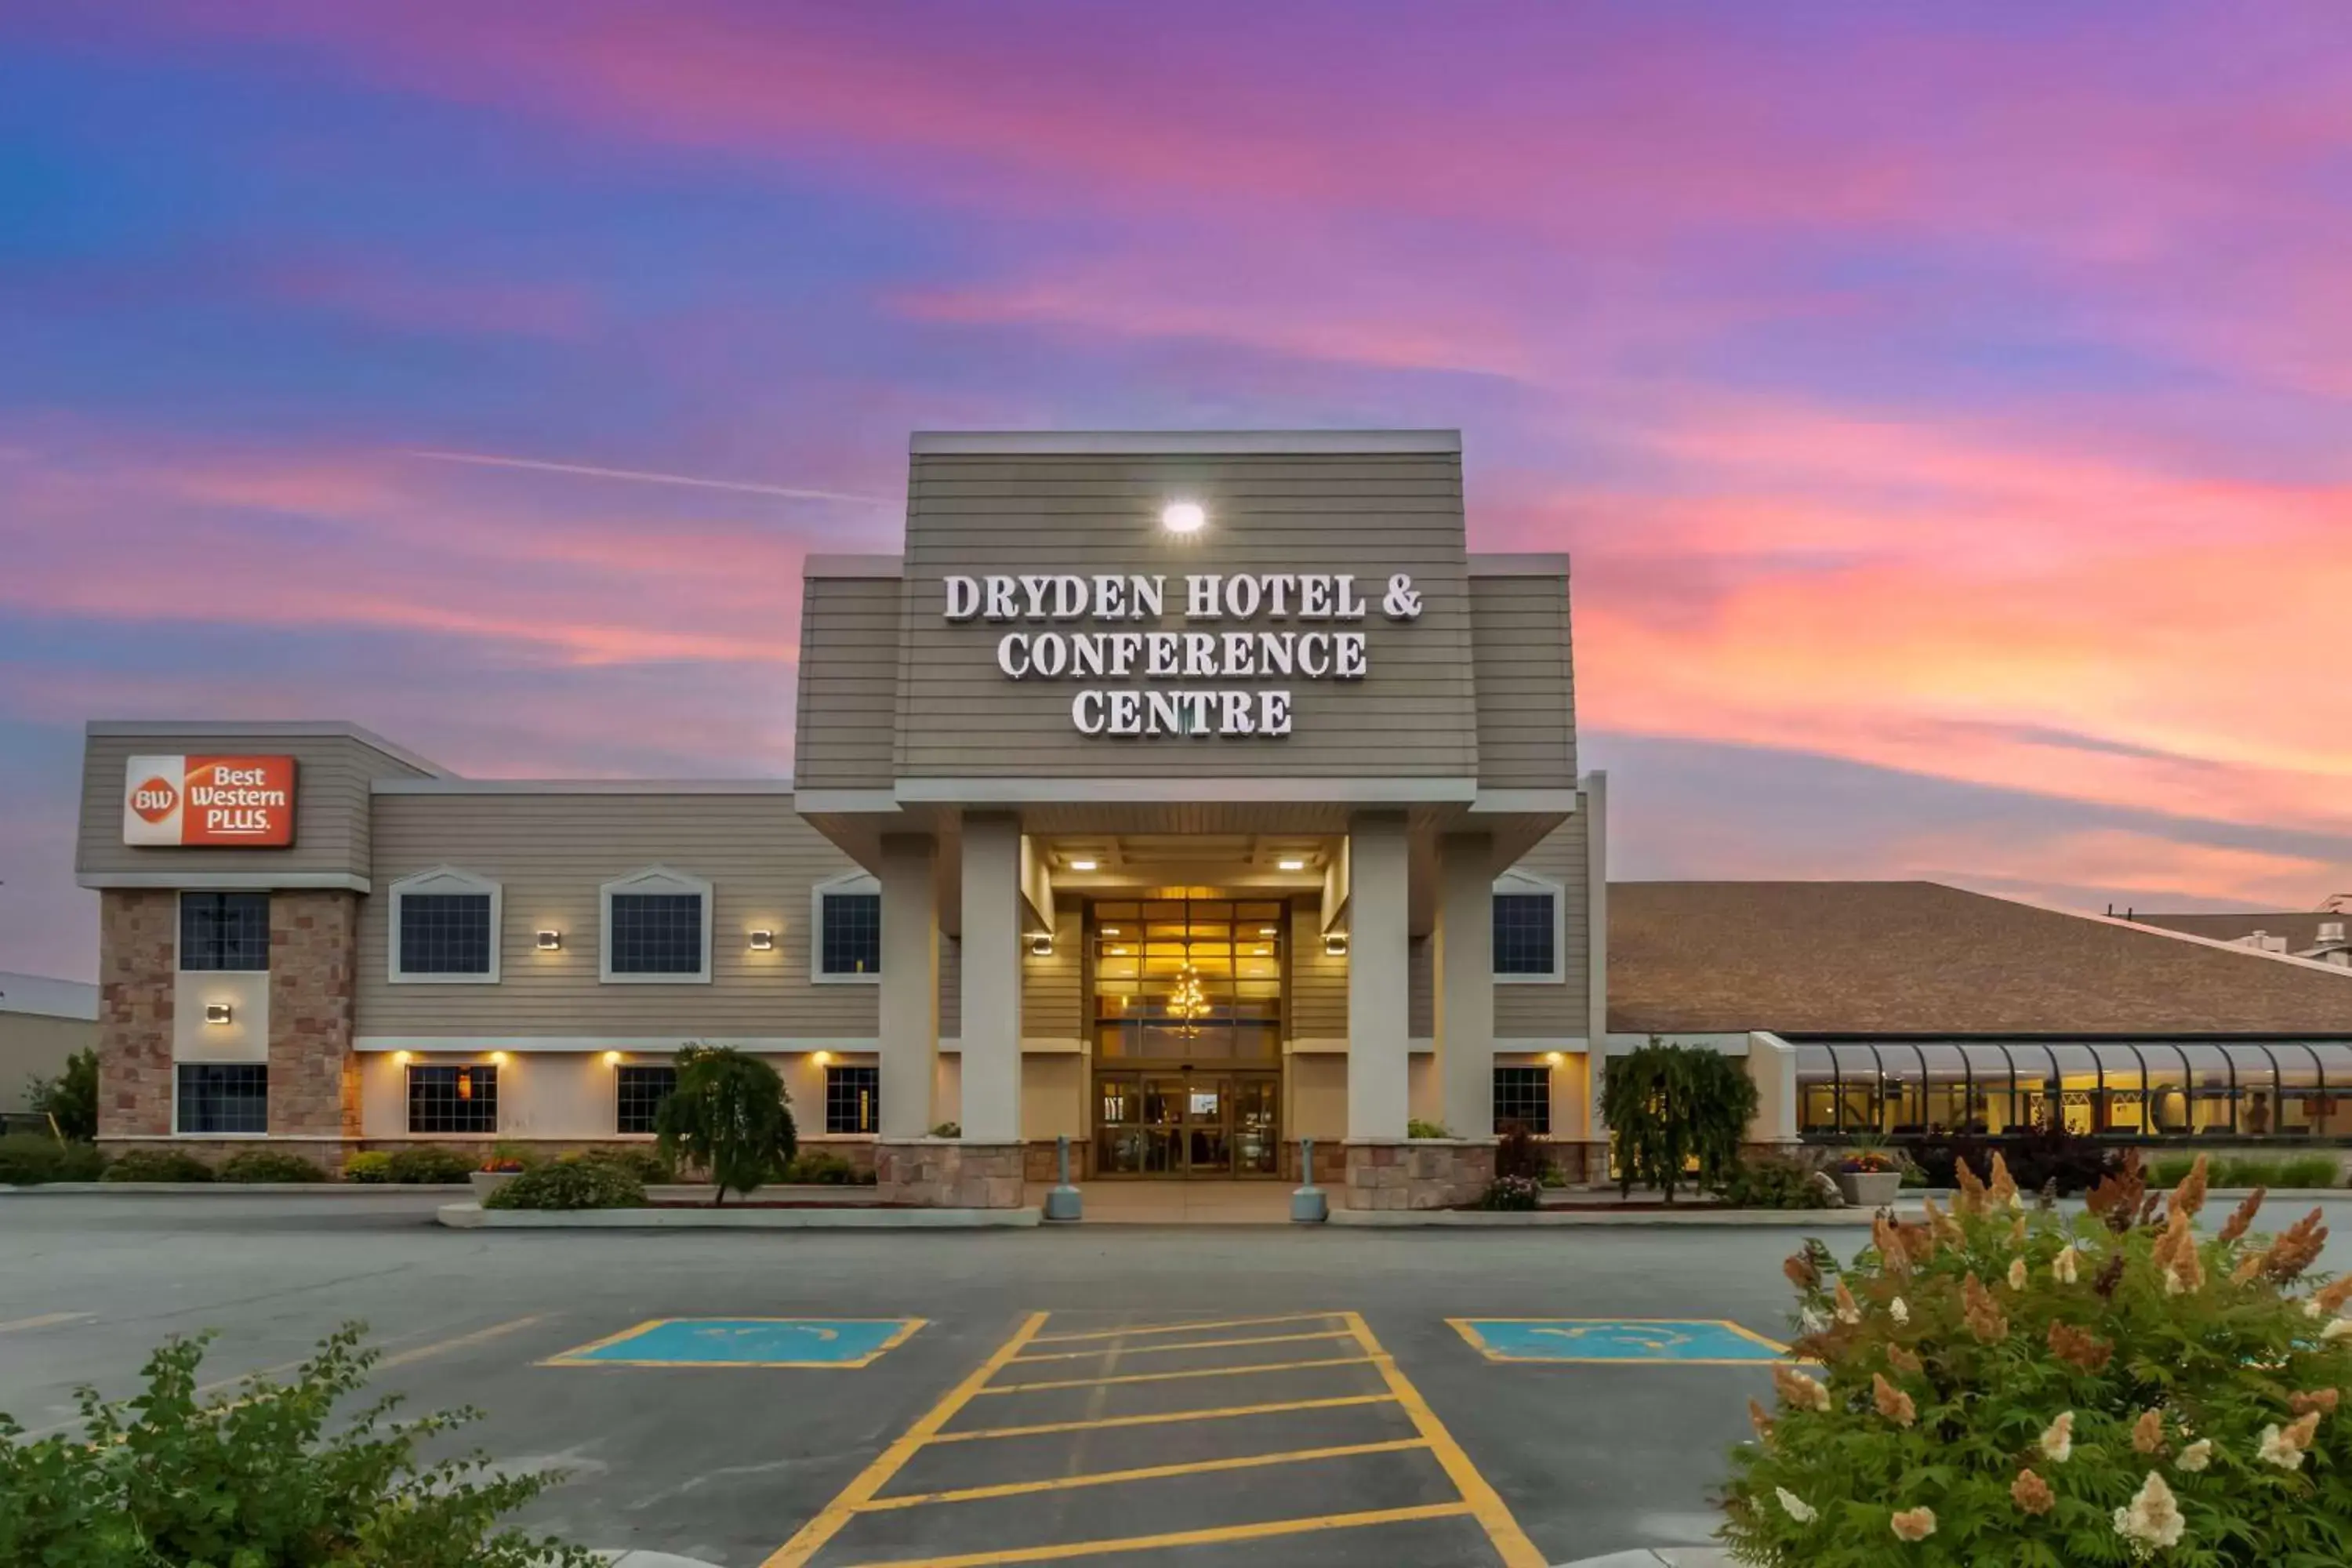 Property Building in Best Western Plus Dryden Hotel and Conference Centre